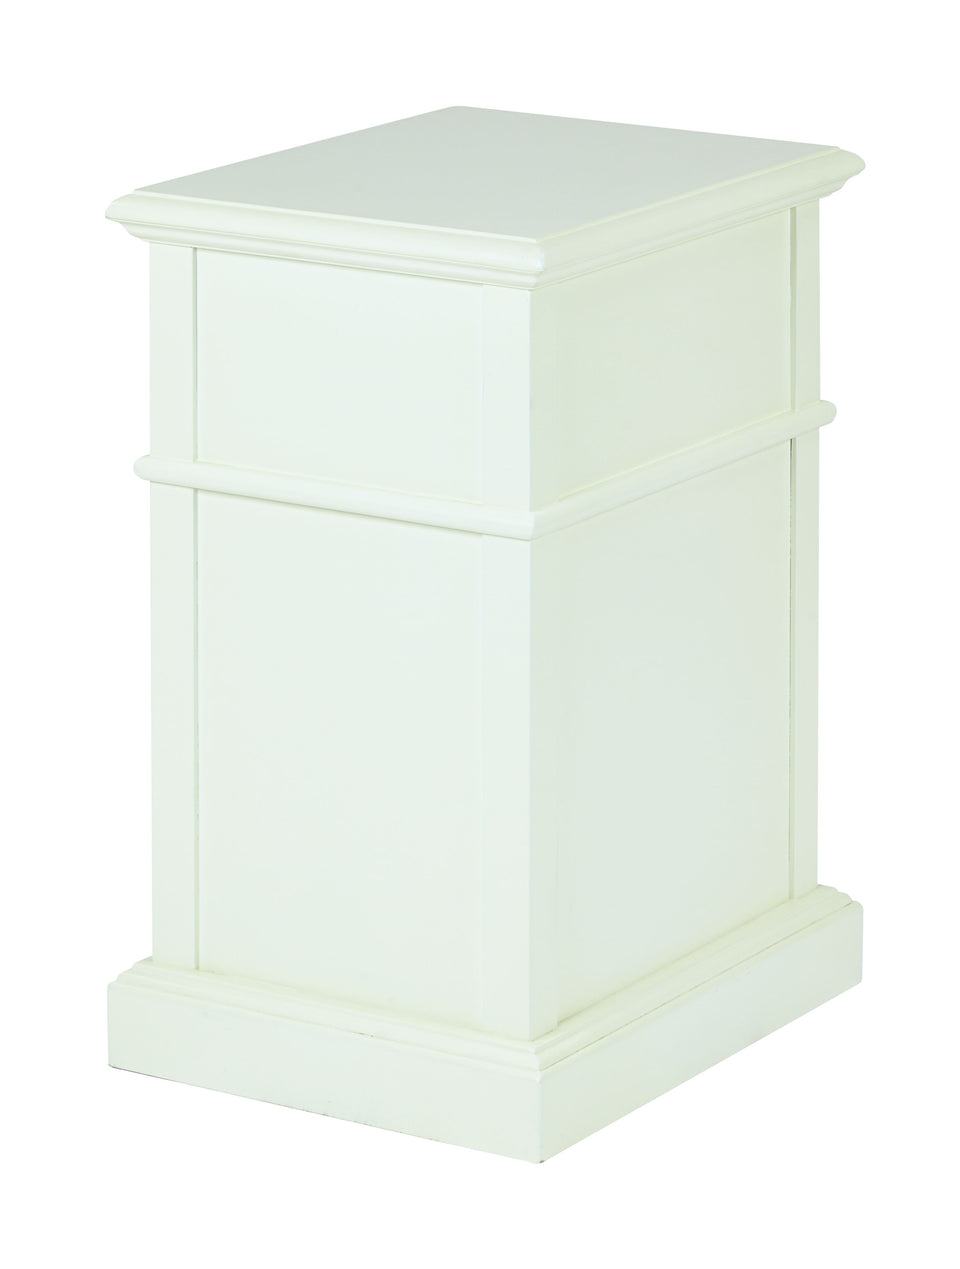 oxford white side table with single drawer and door with metal knob back angle view